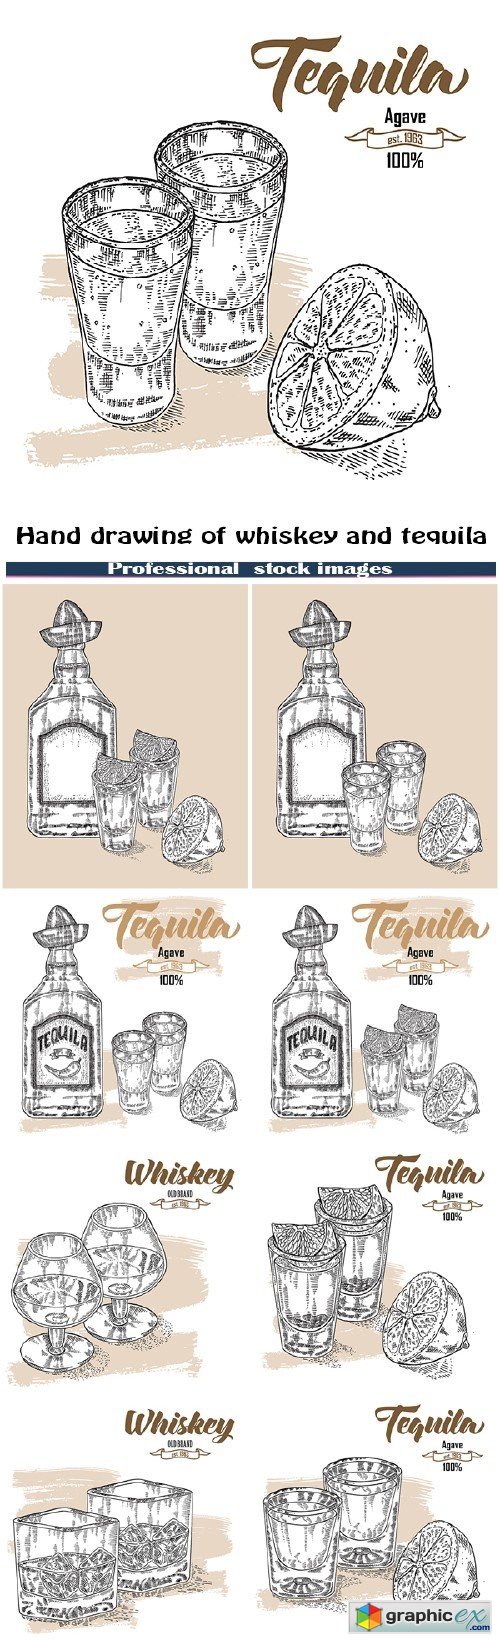 Hand drawing of whiskey and tequila